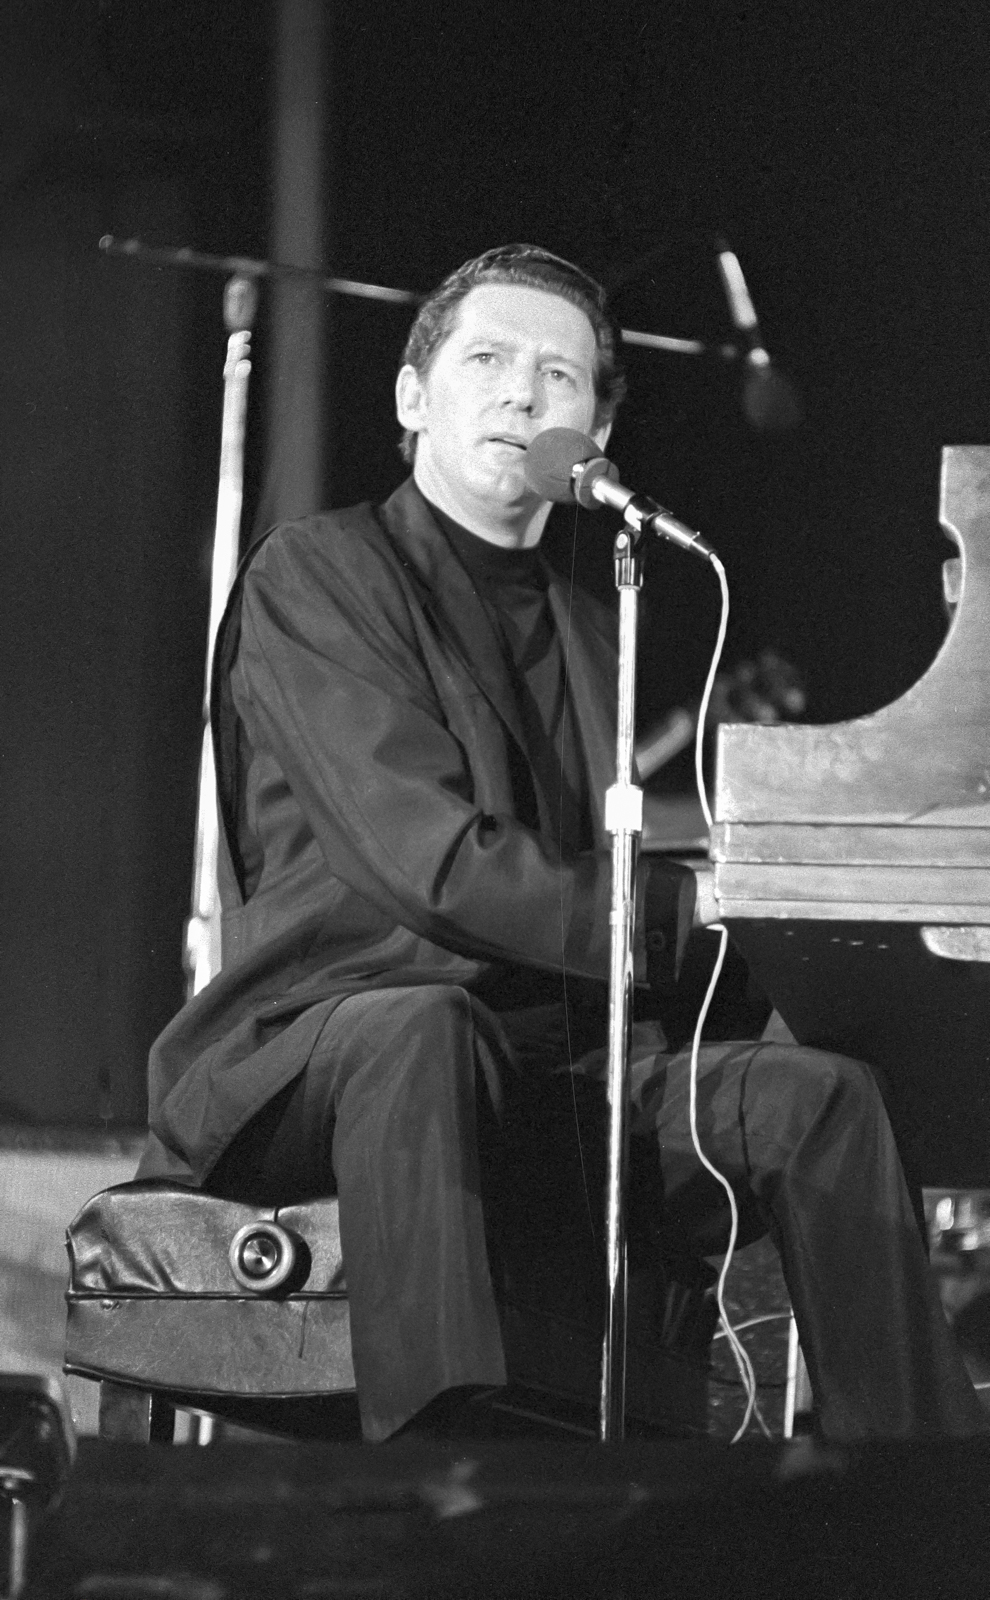 Jerry Lee Lewis 1972 12013 10 021 of 8 2